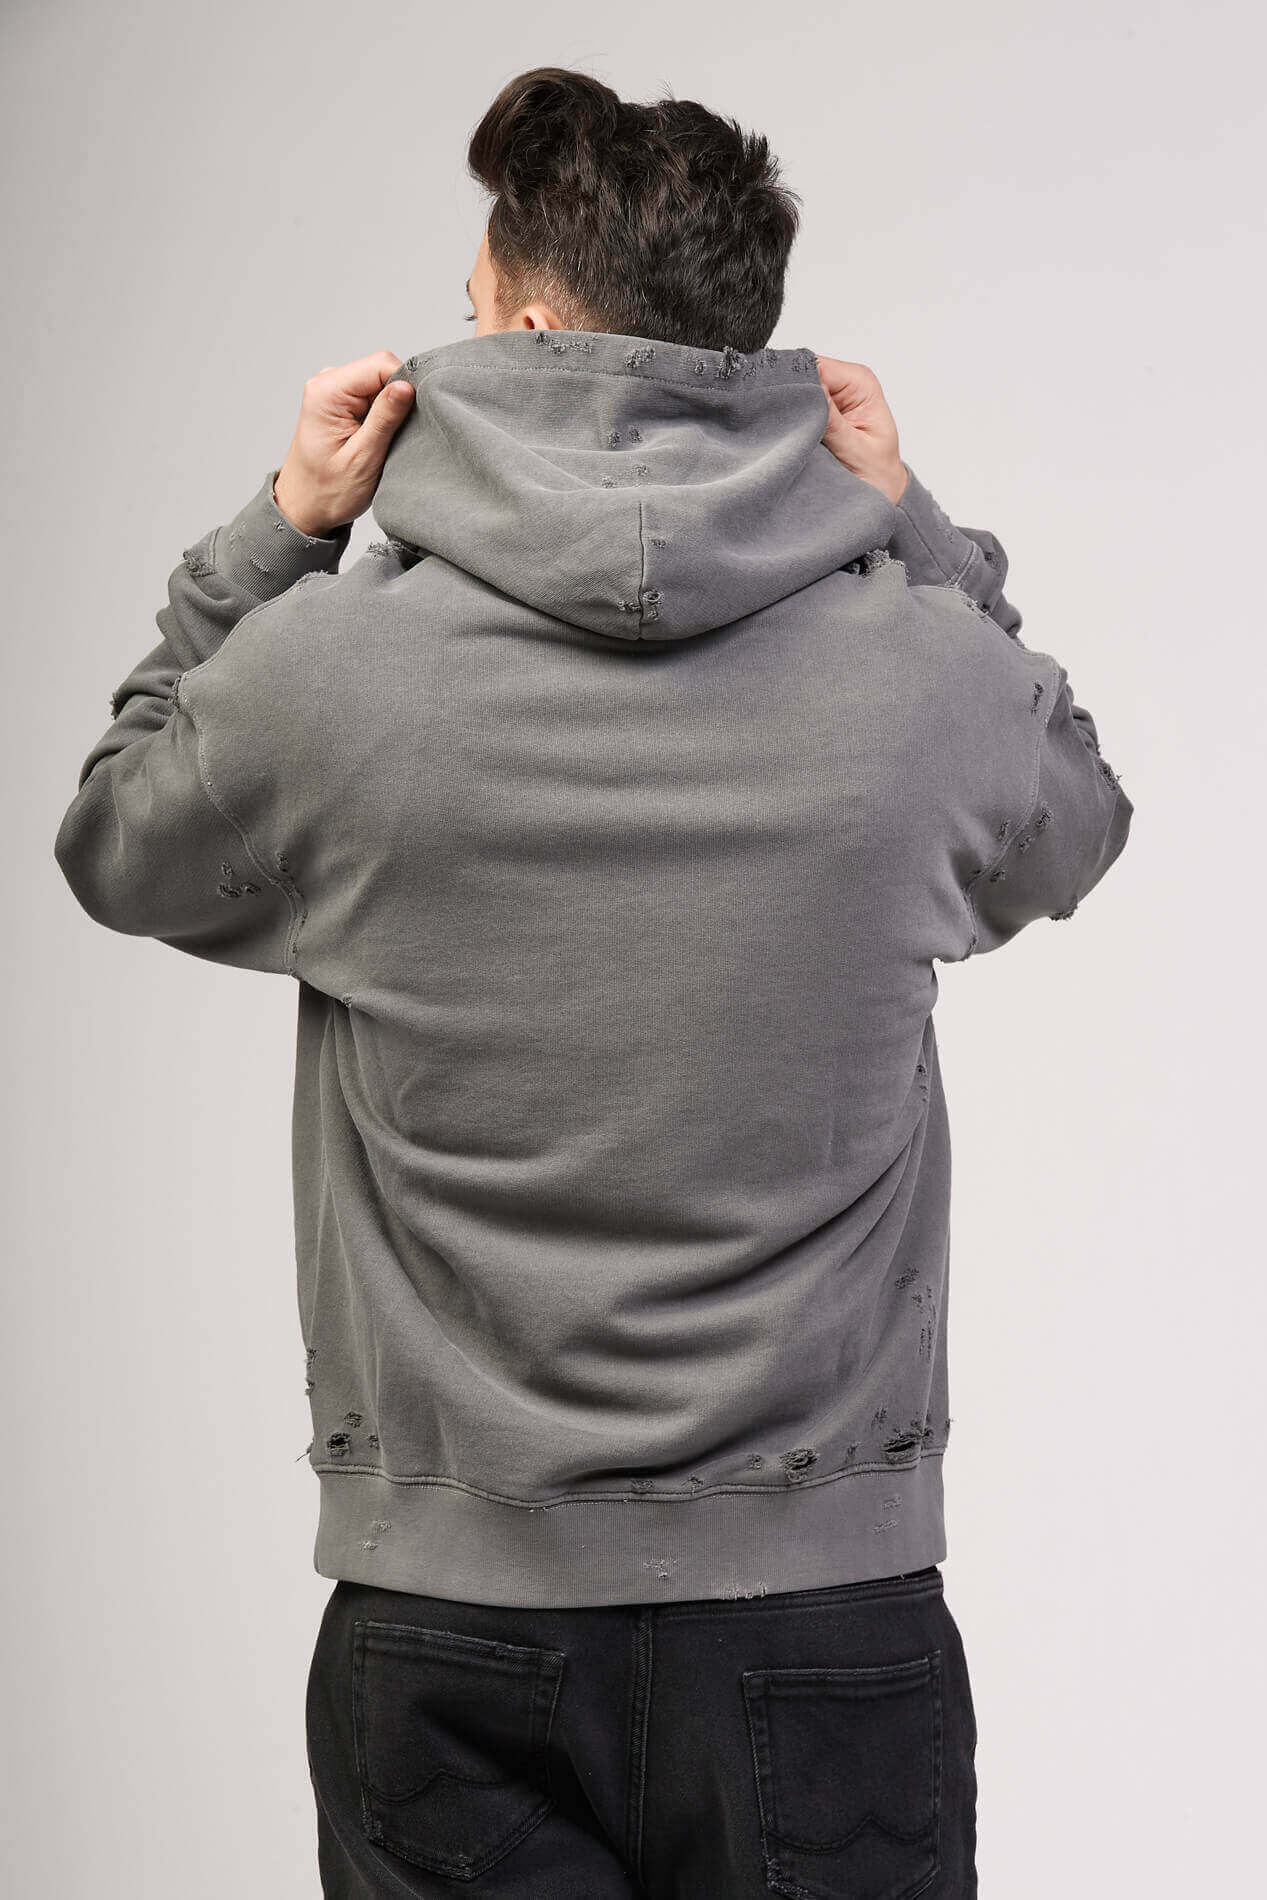 DESTROYED SWEATER Regular fit hoodie sweater. Destroyed style. 100% cotton. Made in Italy. HTC LOS ANGELES